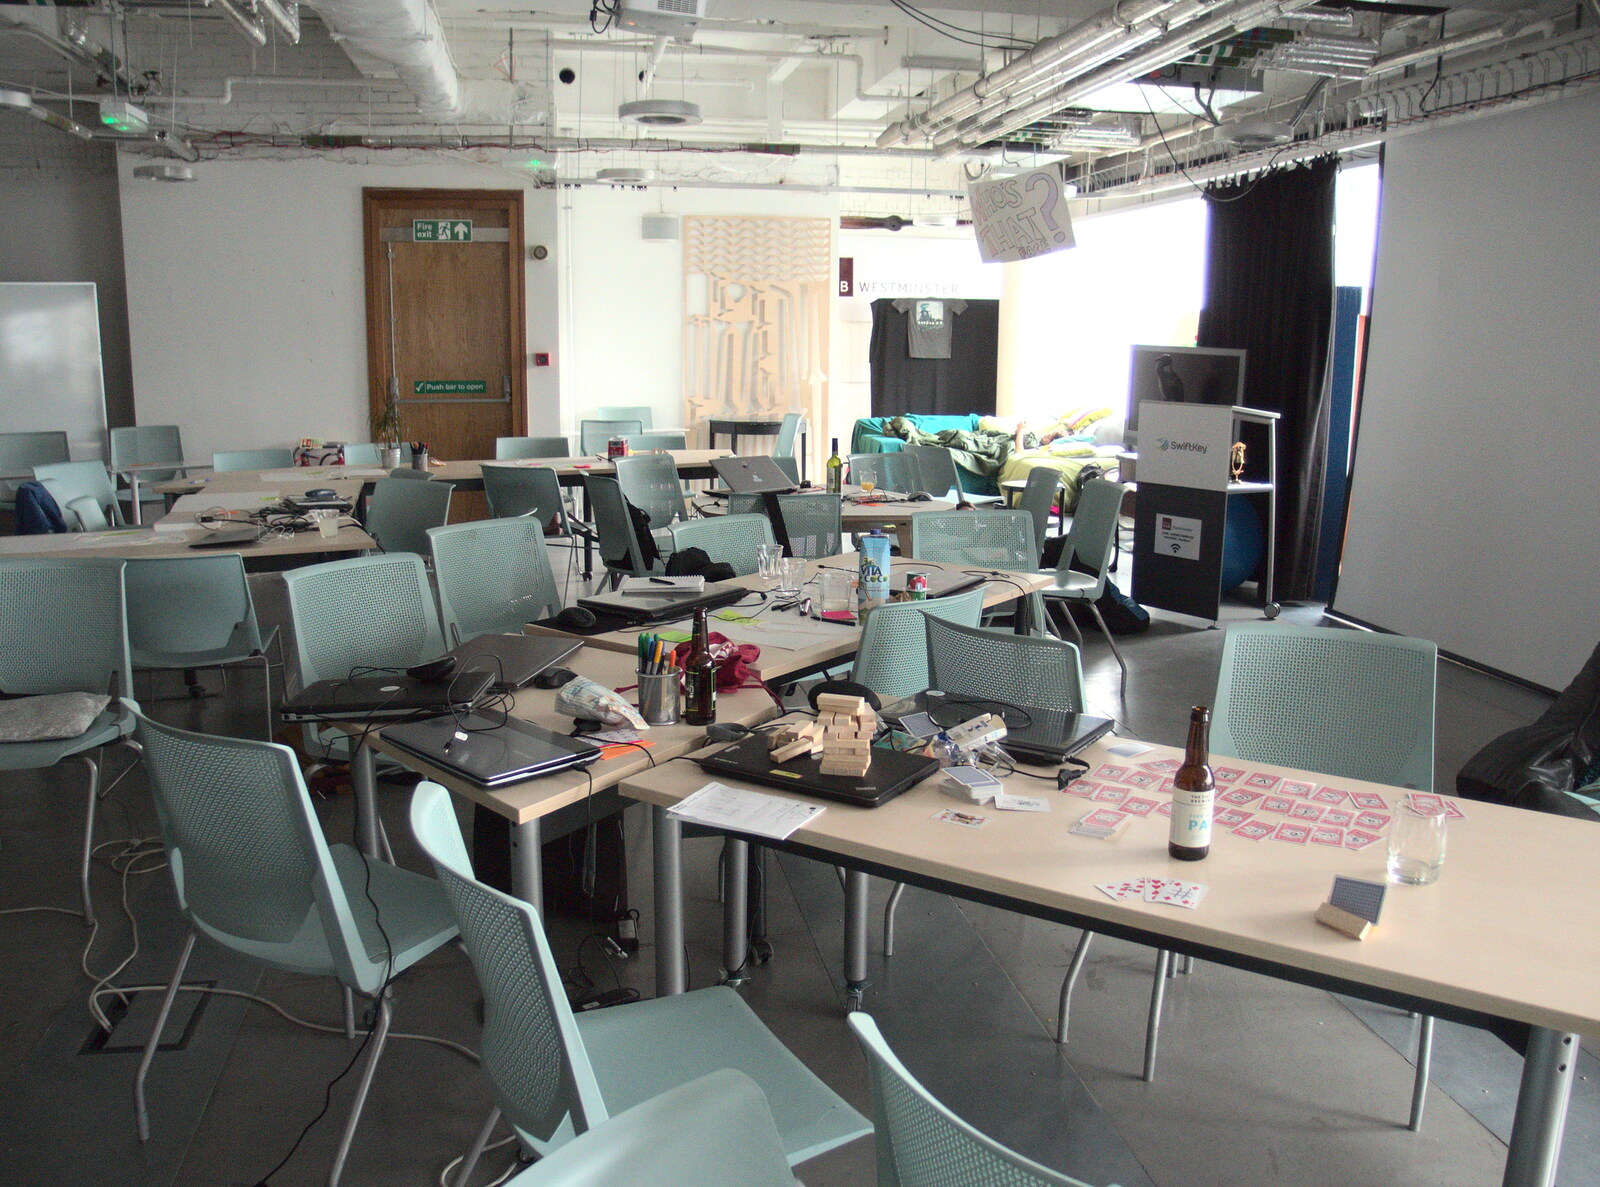 The morning after from SwiftKey Innovation Days, The Haymarket, London - 27th June 2014